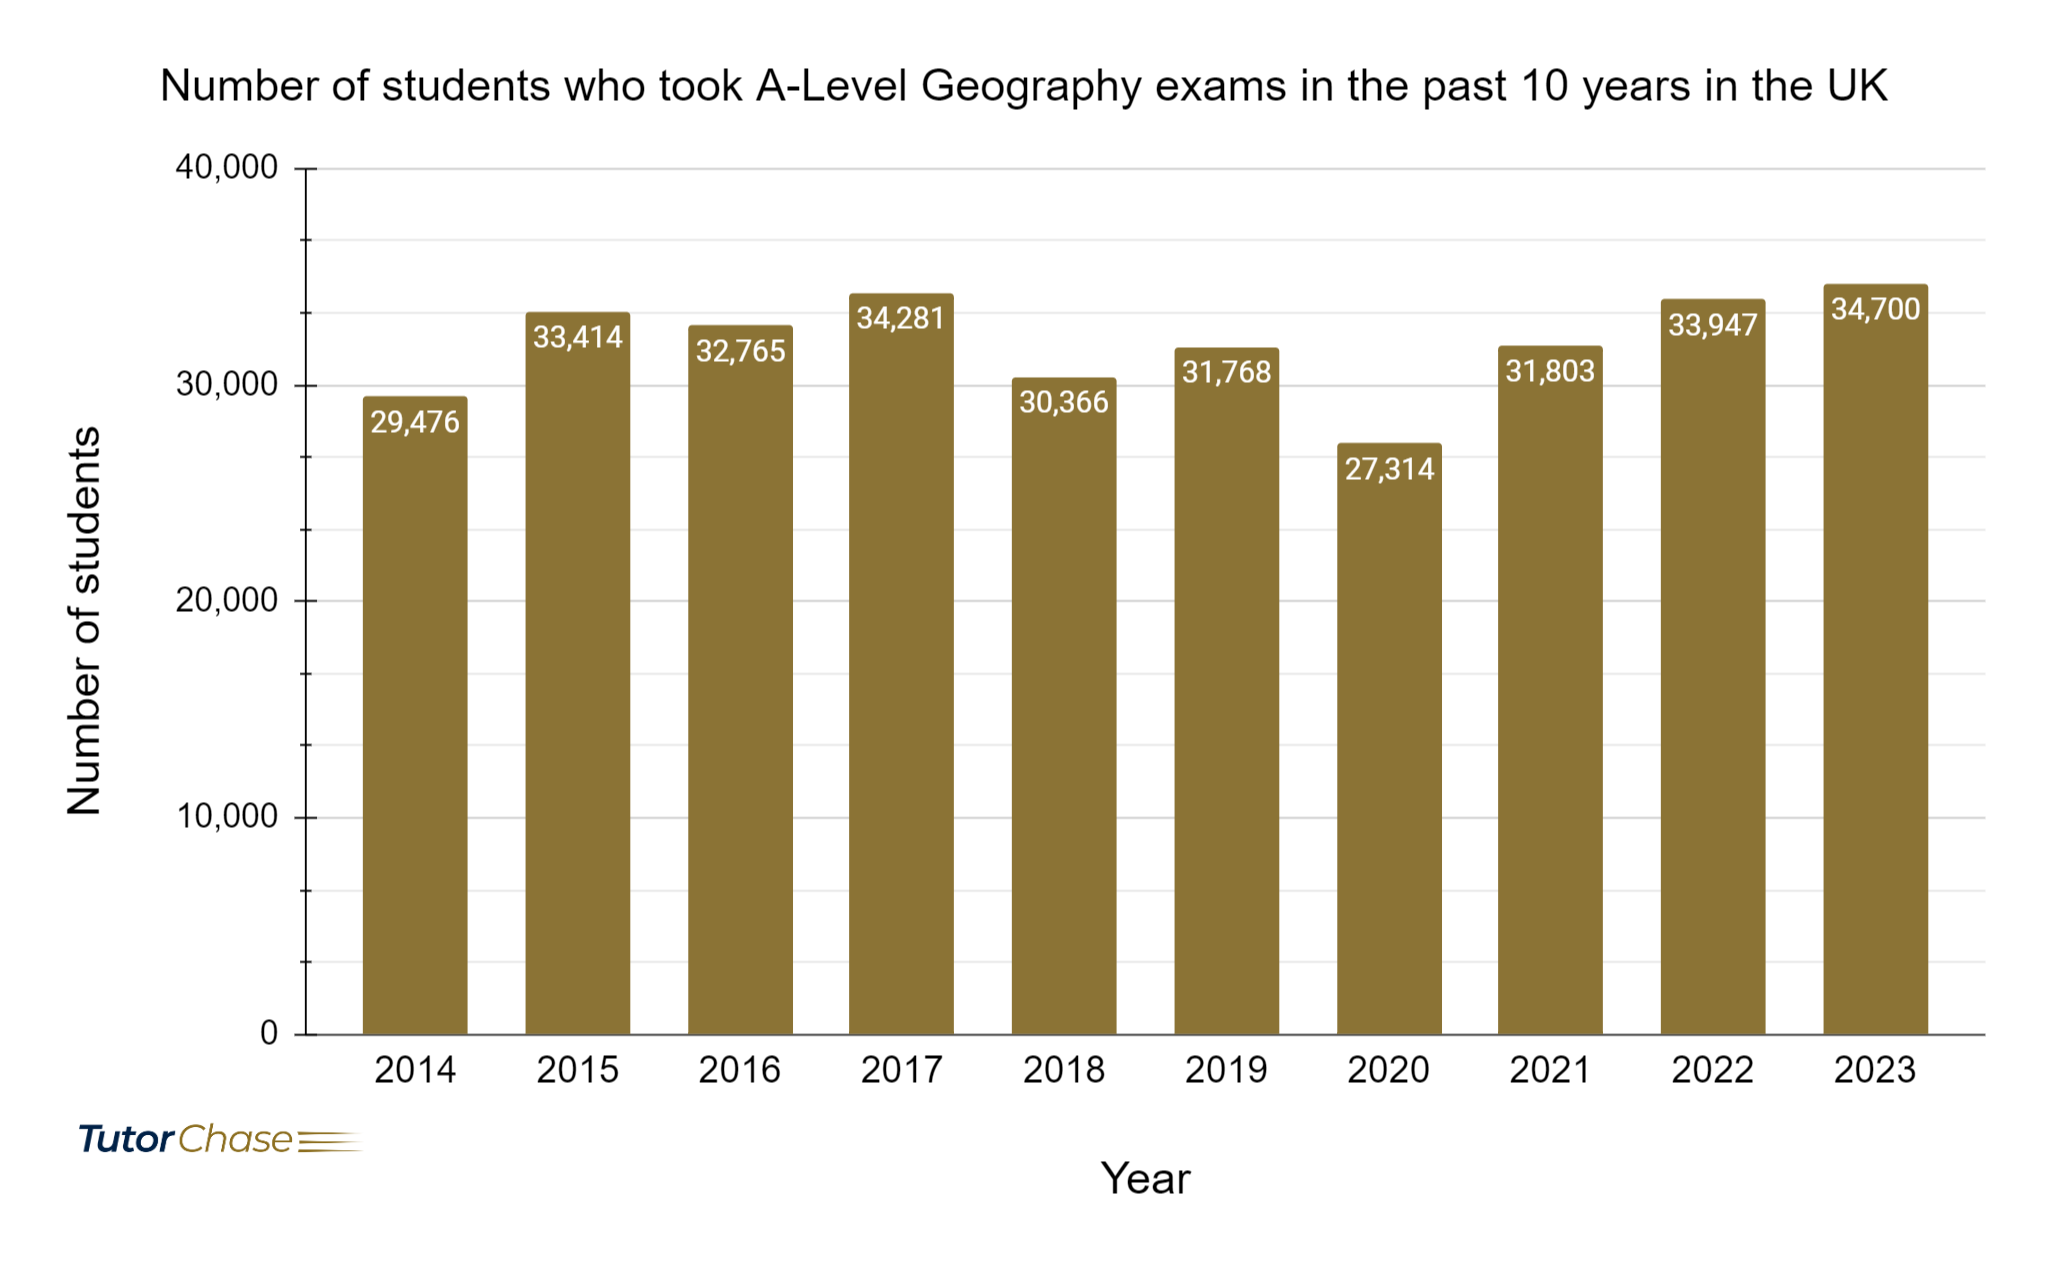 Number of students who took A-Level Geography exams in the past 10 years